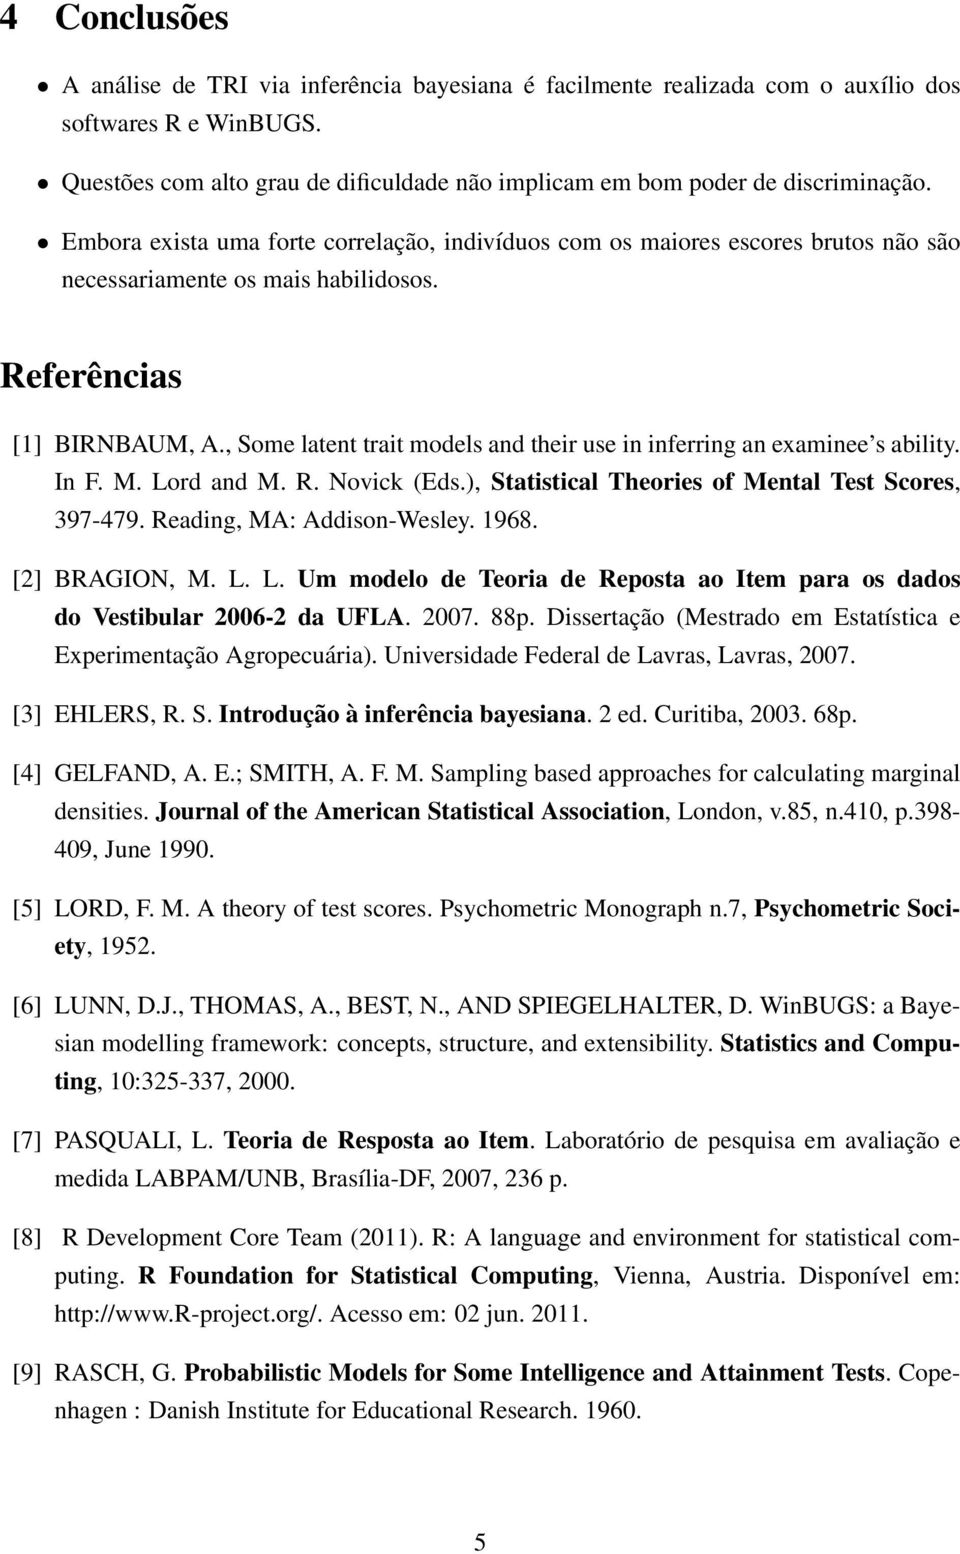 , Some latent trait models and their use in inferring an examinee s ability. In F. M. Lord and M. R. Novick (Eds.), Statistical Theories of Mental Test Scores, 397-479. Reading, MA: Addison-Wesley.